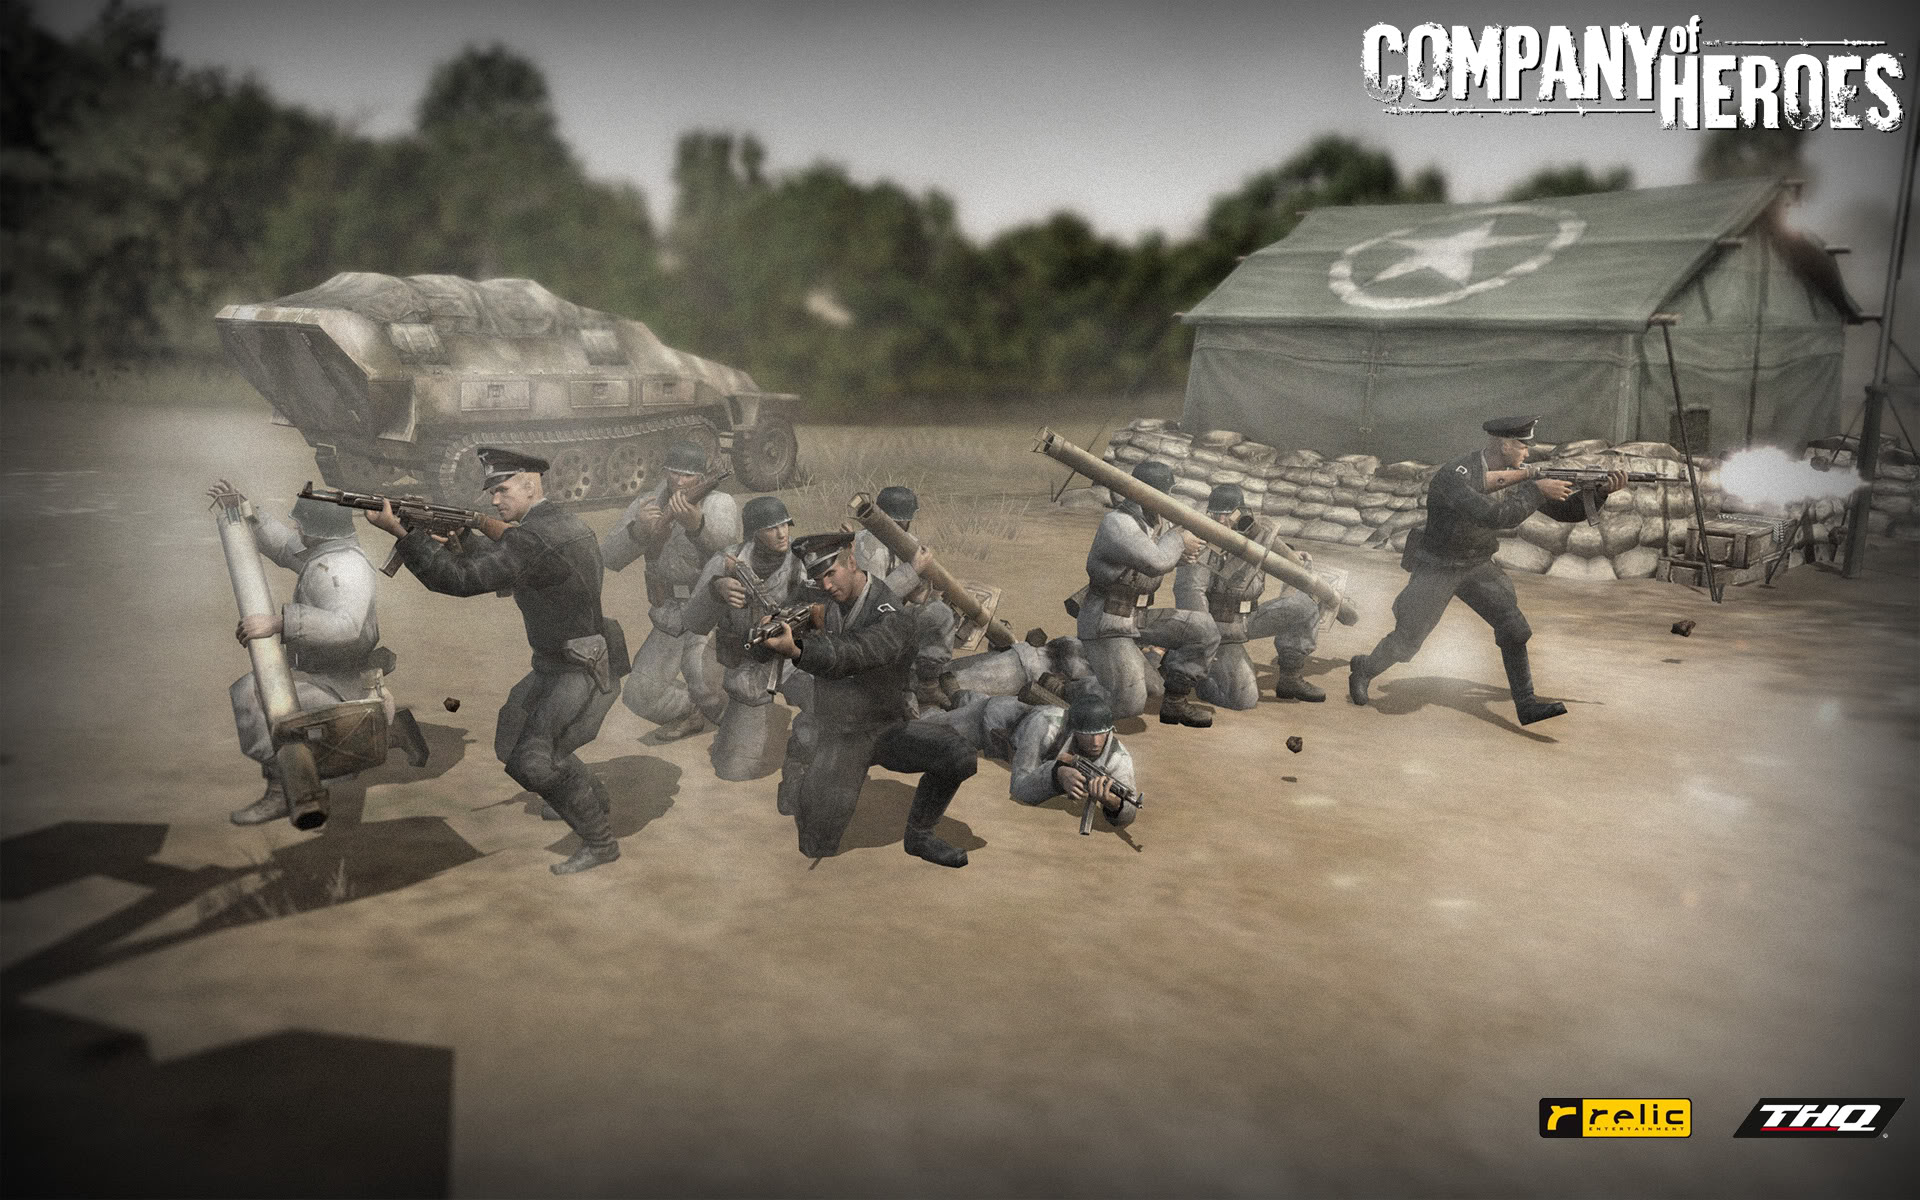 best company of heroes 2 image